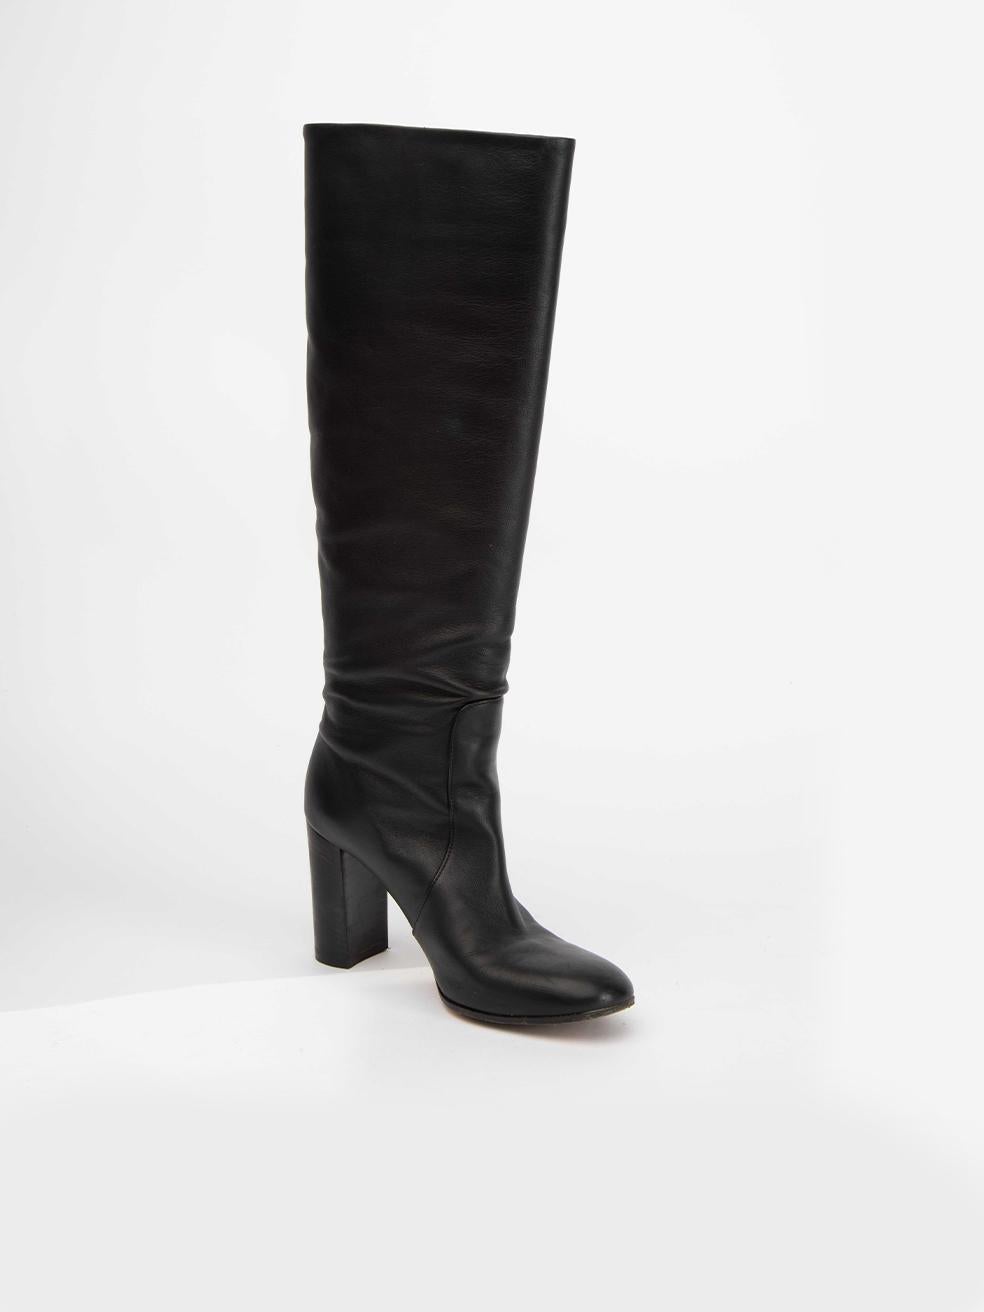 CONDITION is Very good. Minimal wear to shoes is evident. Light scuffs to block heel and minimal creasing to vamps on this used Gianvito Rossi designer resale item.
 
 Details
  Black
 Leather
 Knee high boots
 Round toe
 High block heel
 
 
 Made